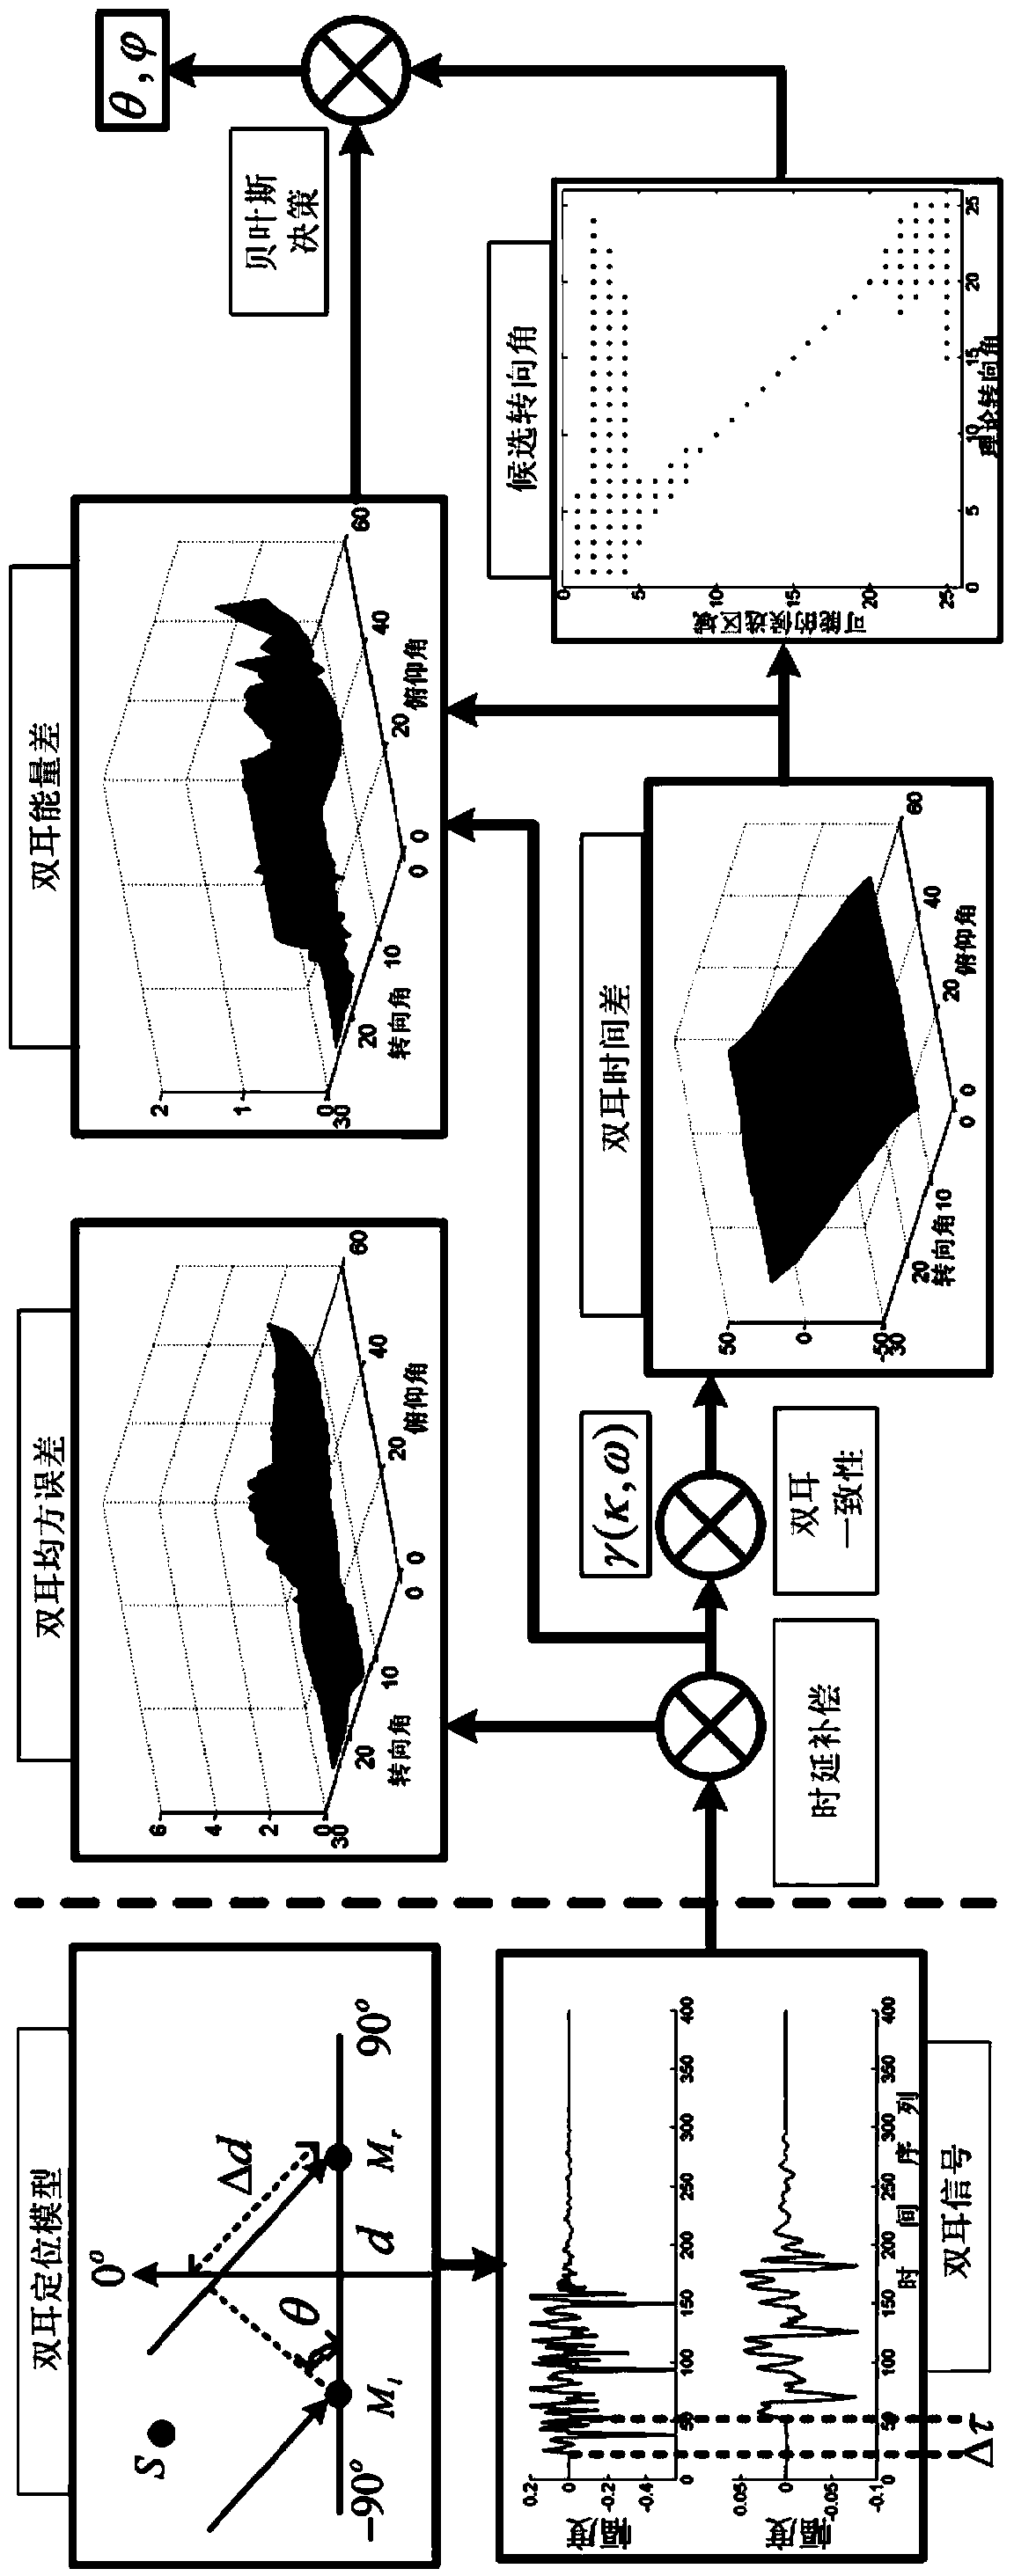 Binaural sound source positioning method based on delay compensation and binaural coincidence